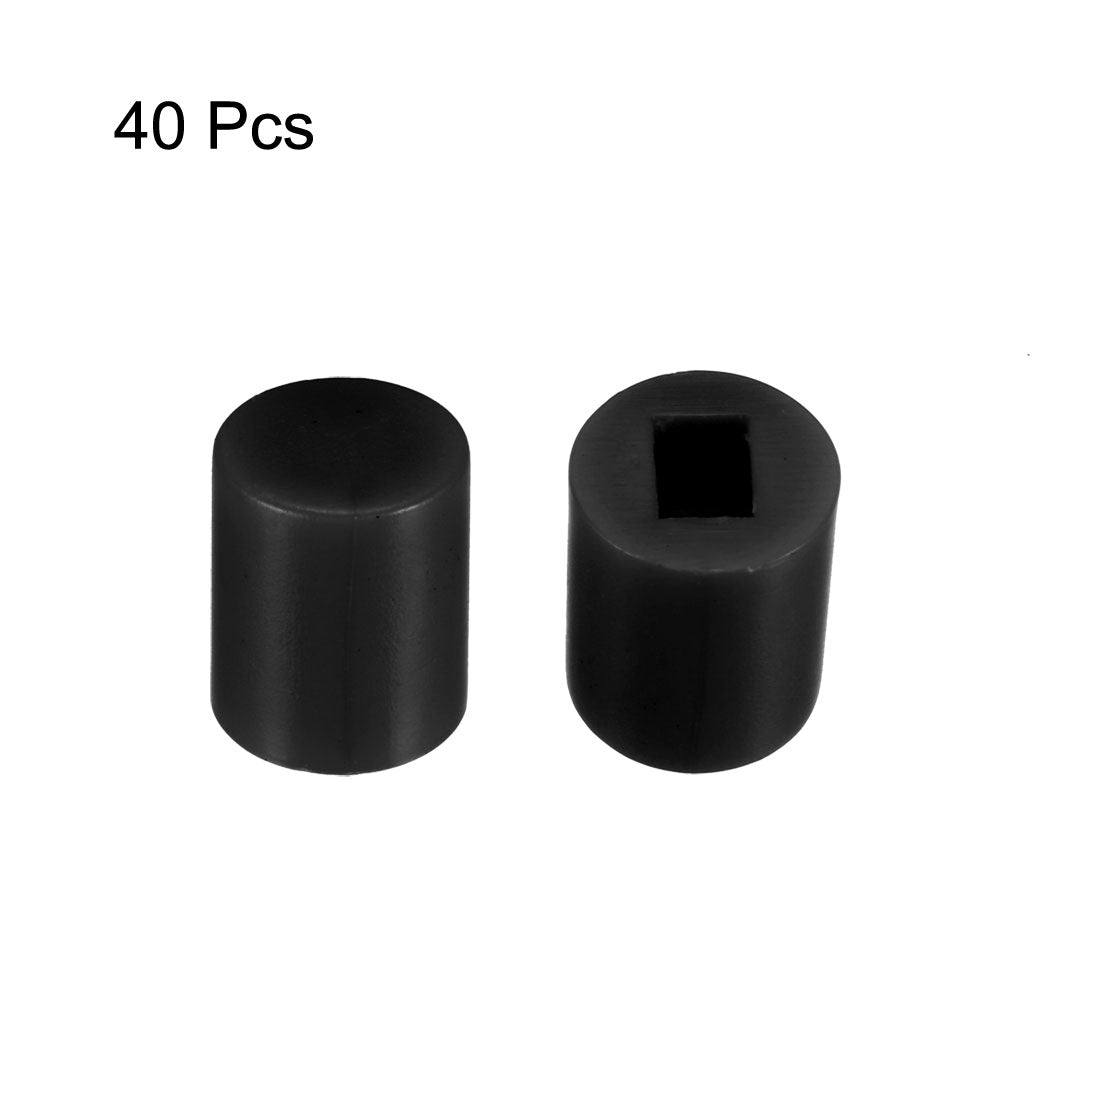 uxcell Uxcell 40Pcs Plastic 6x7mm Latching Pushbutton Tactile Switch Caps Cover Keycaps Protector Black